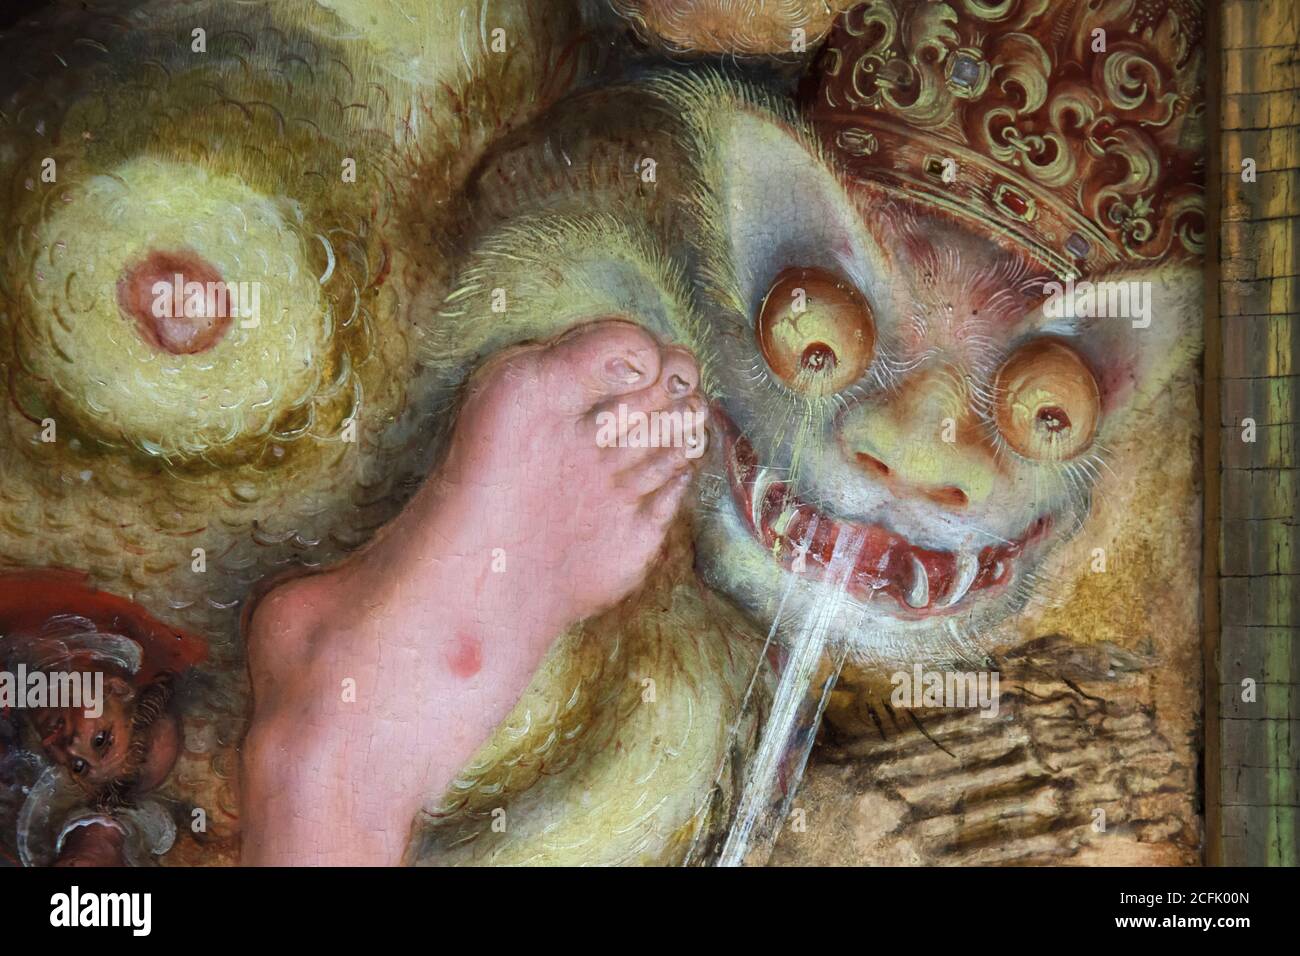 Devil depicted in the paining 'The Allegory of Salvation and Sin' by German Renaissance painter Lucas Cranach the Younger (1557) on display in the Museum der bildenden Künste (Museum of Fine Arts) in Leipzig, Saxony, Germany. Stock Photo